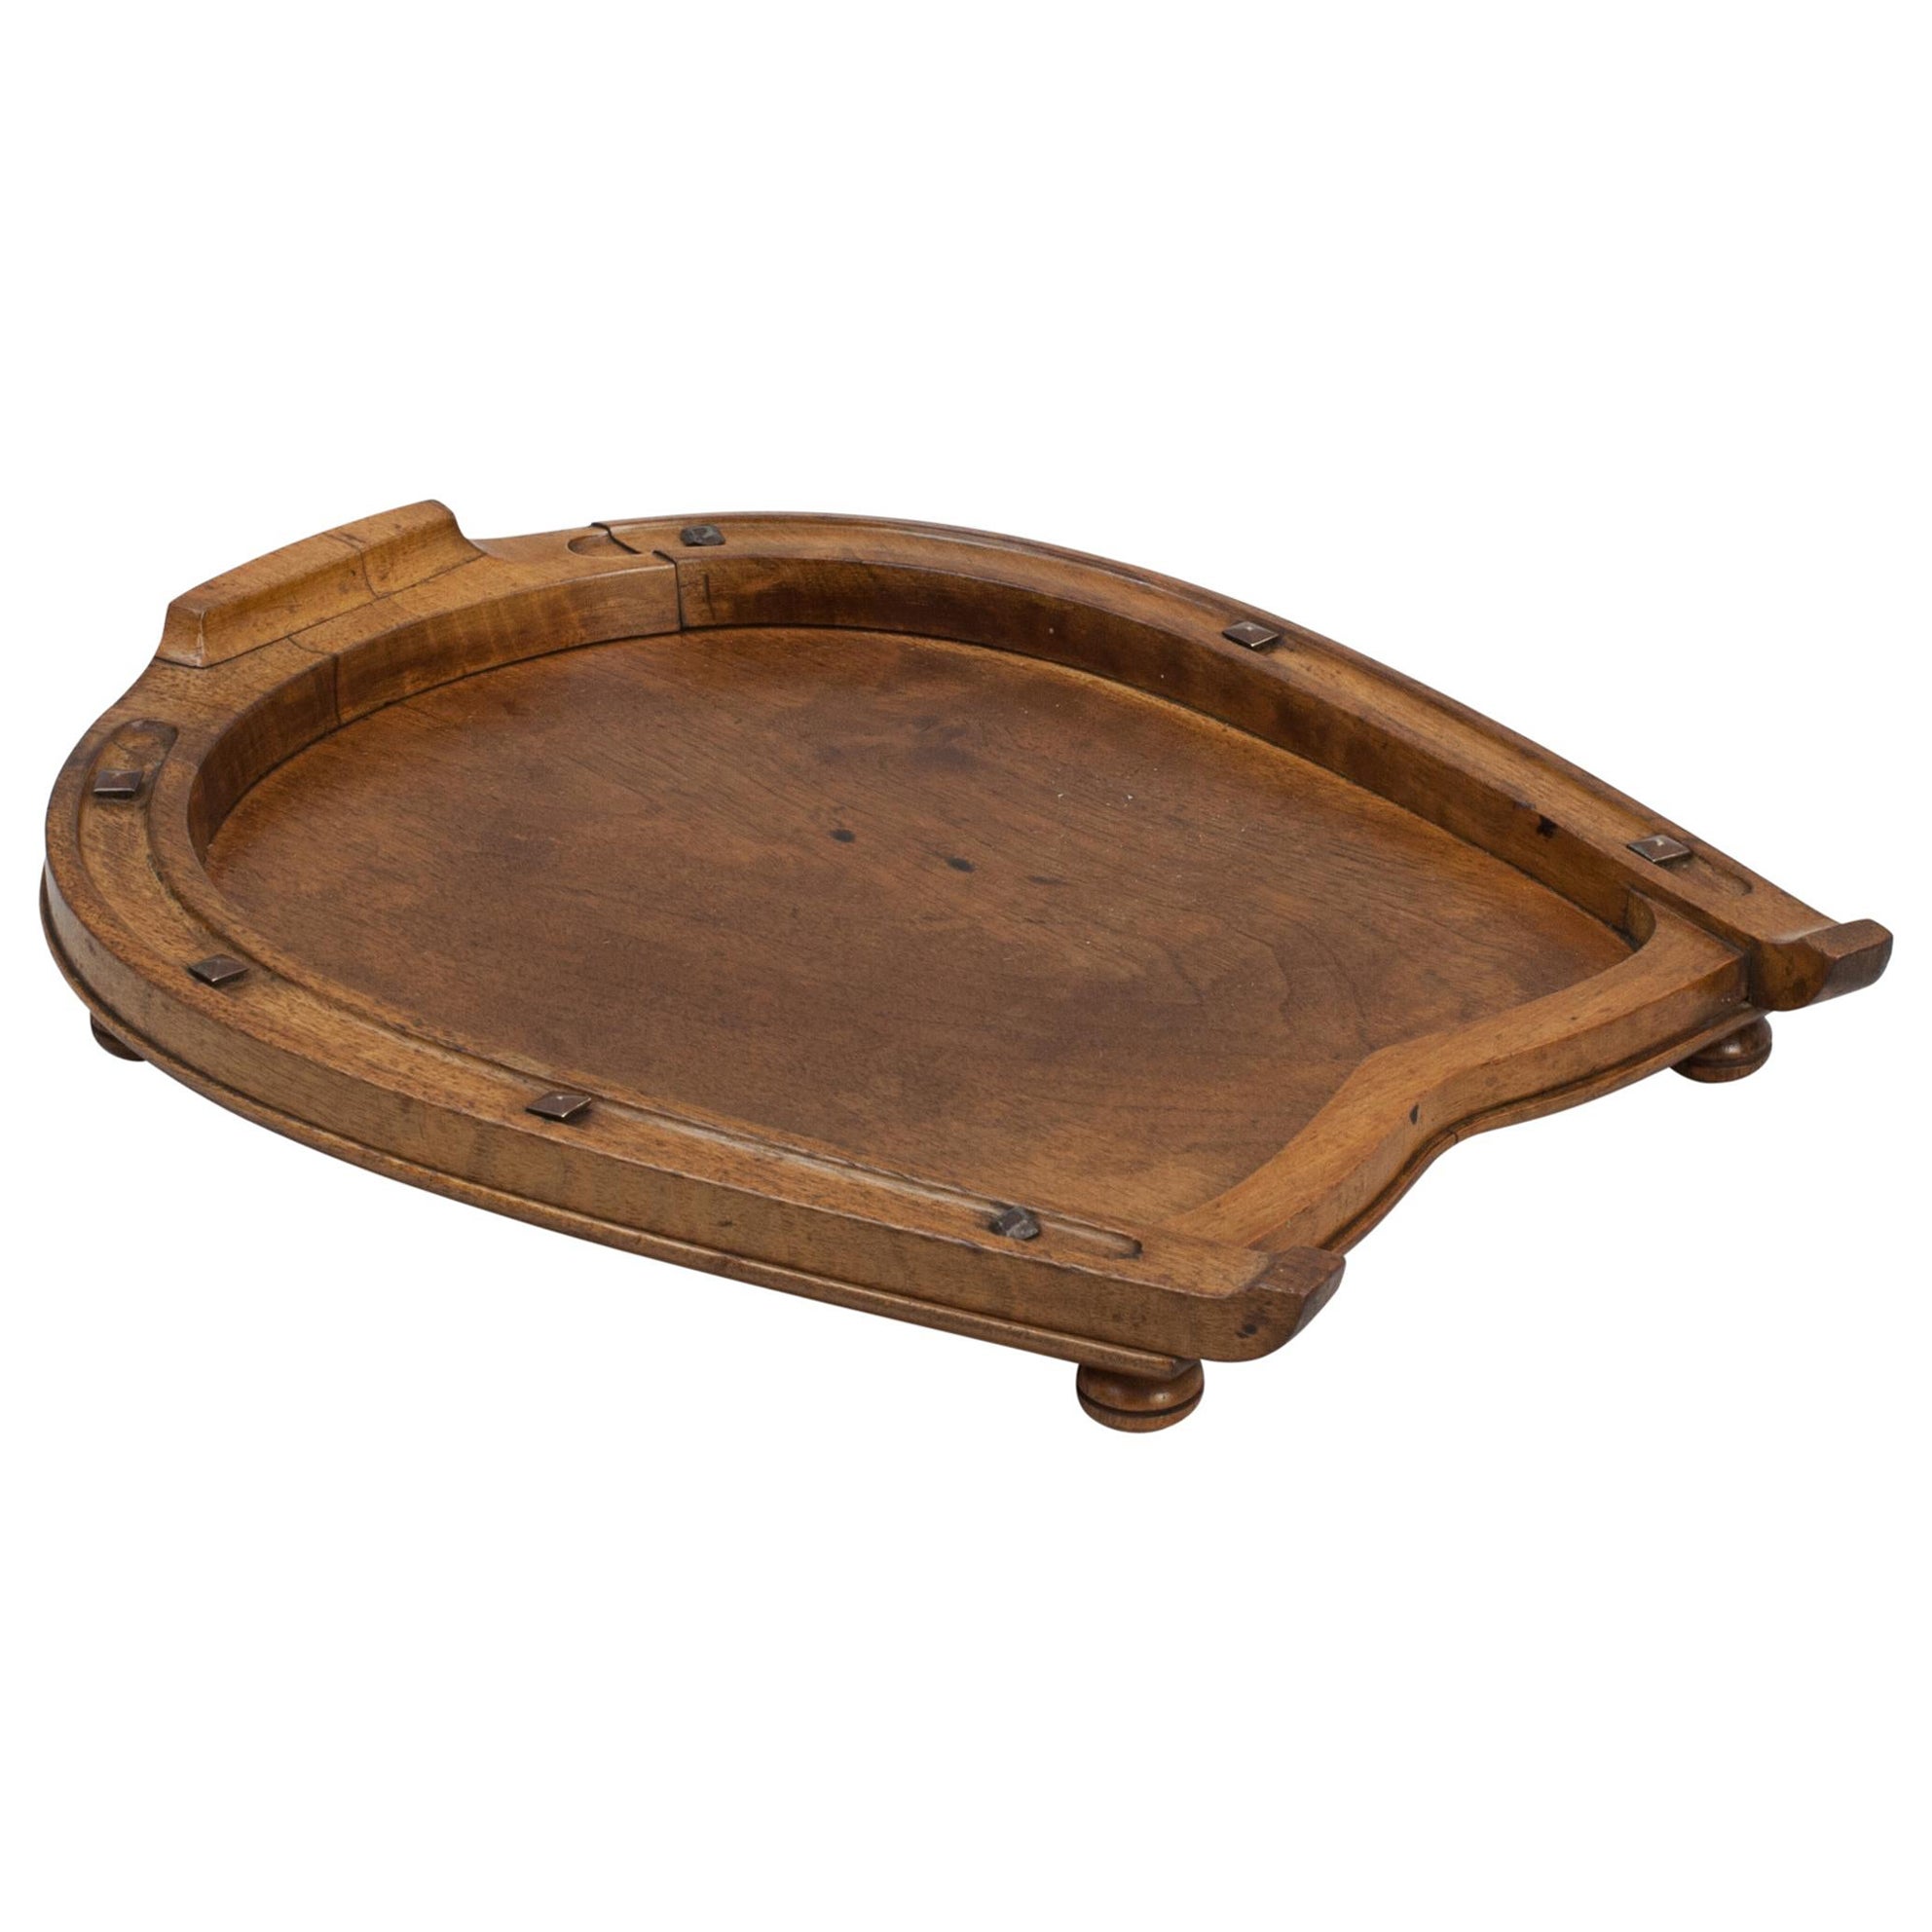 Antique Equestrian Horseshoe Tray For Sale